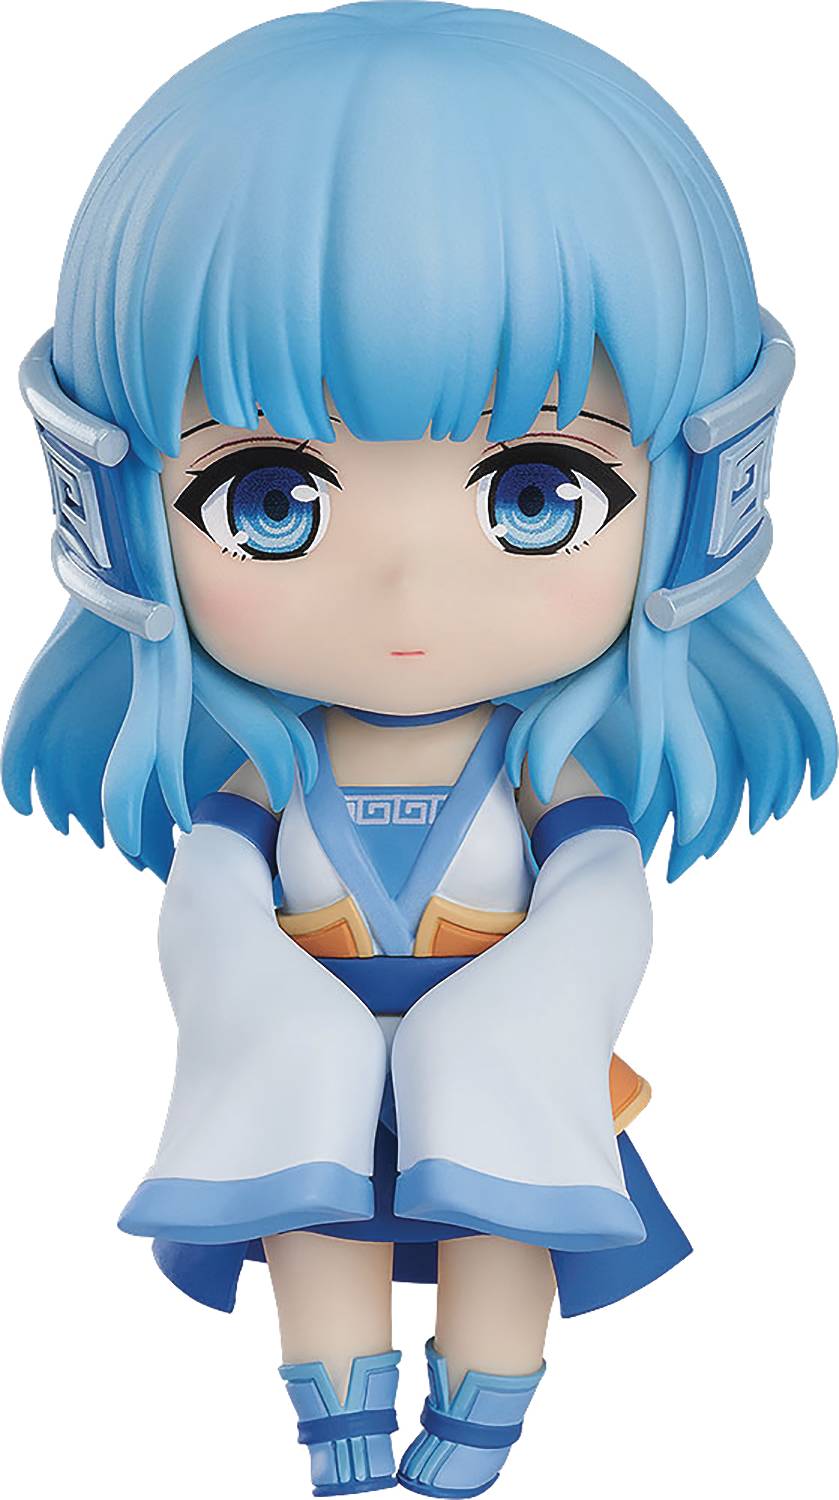 CHINESE PALADIN SWORD AND FAIRY LONG KUI BLUE NENDOROID AF (